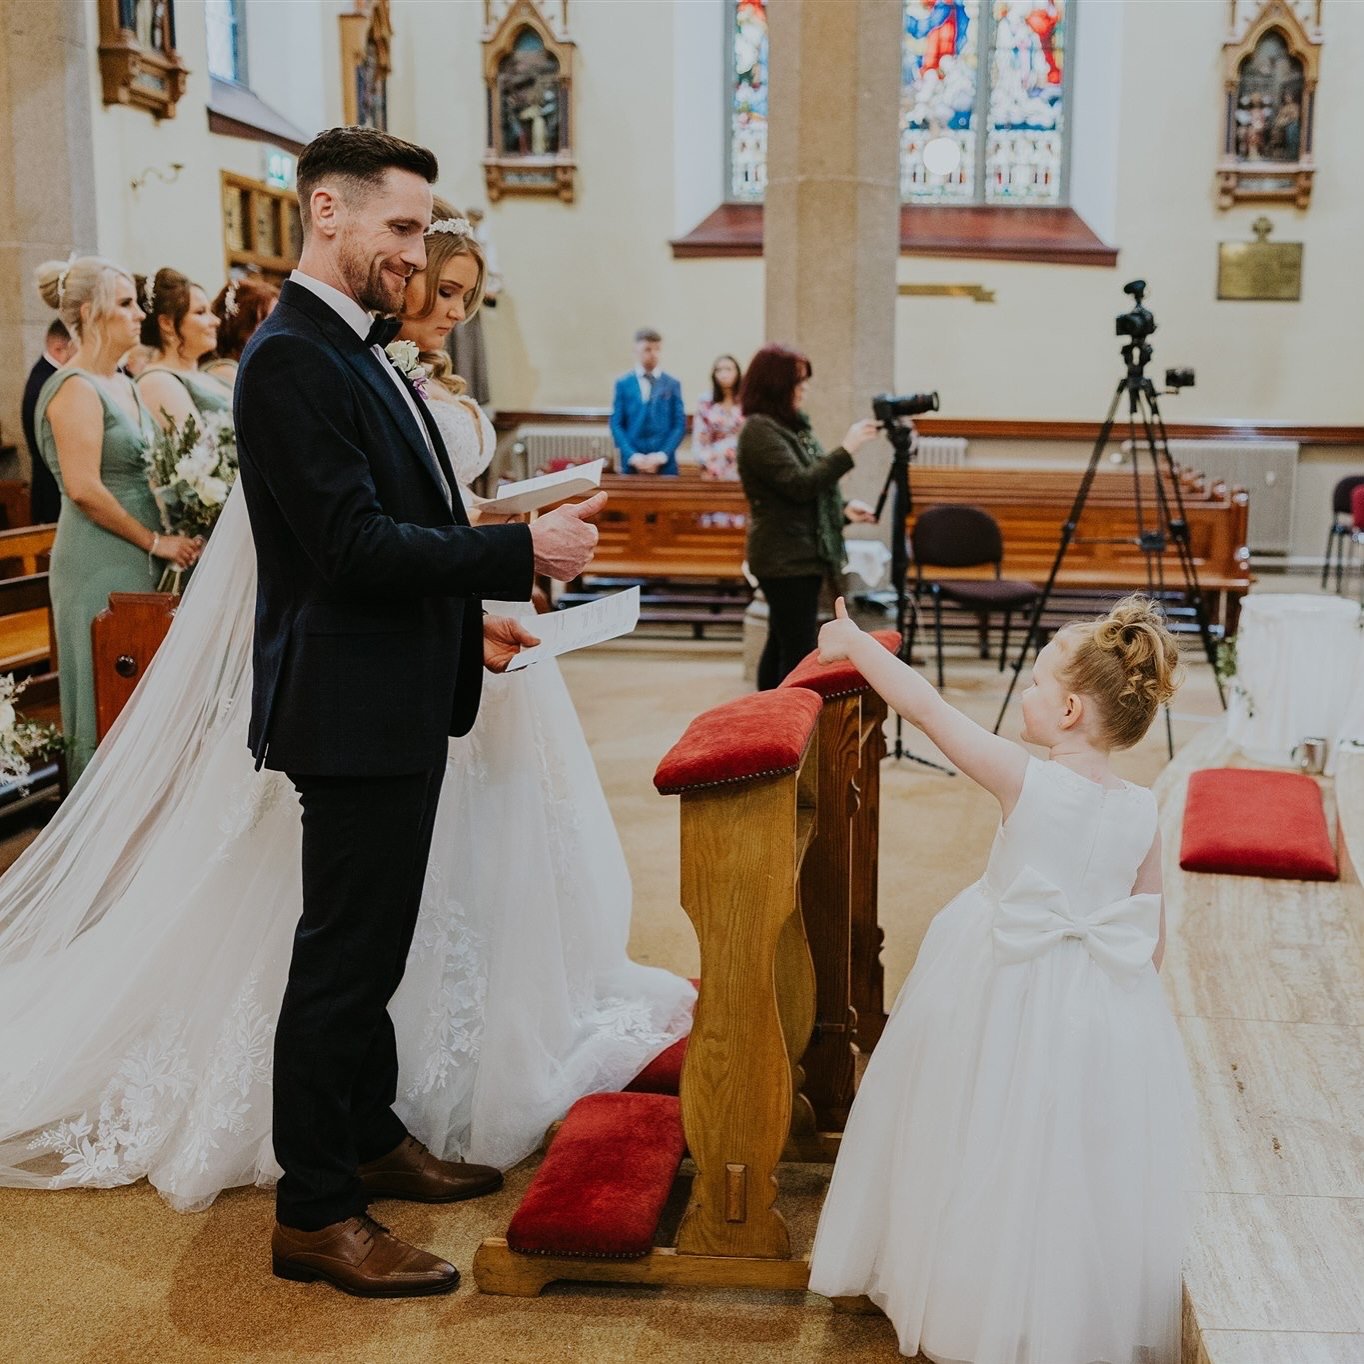 Great job Dad! Great job kiddo! Wee moments like these, the camera is always on!

.
.
.
.
 .
#wedding #weddingday #weddingphotography #weddingphotographer #niwedding #northernirelandweddings #northernireland #niweddingphotography #ireland #loveislove